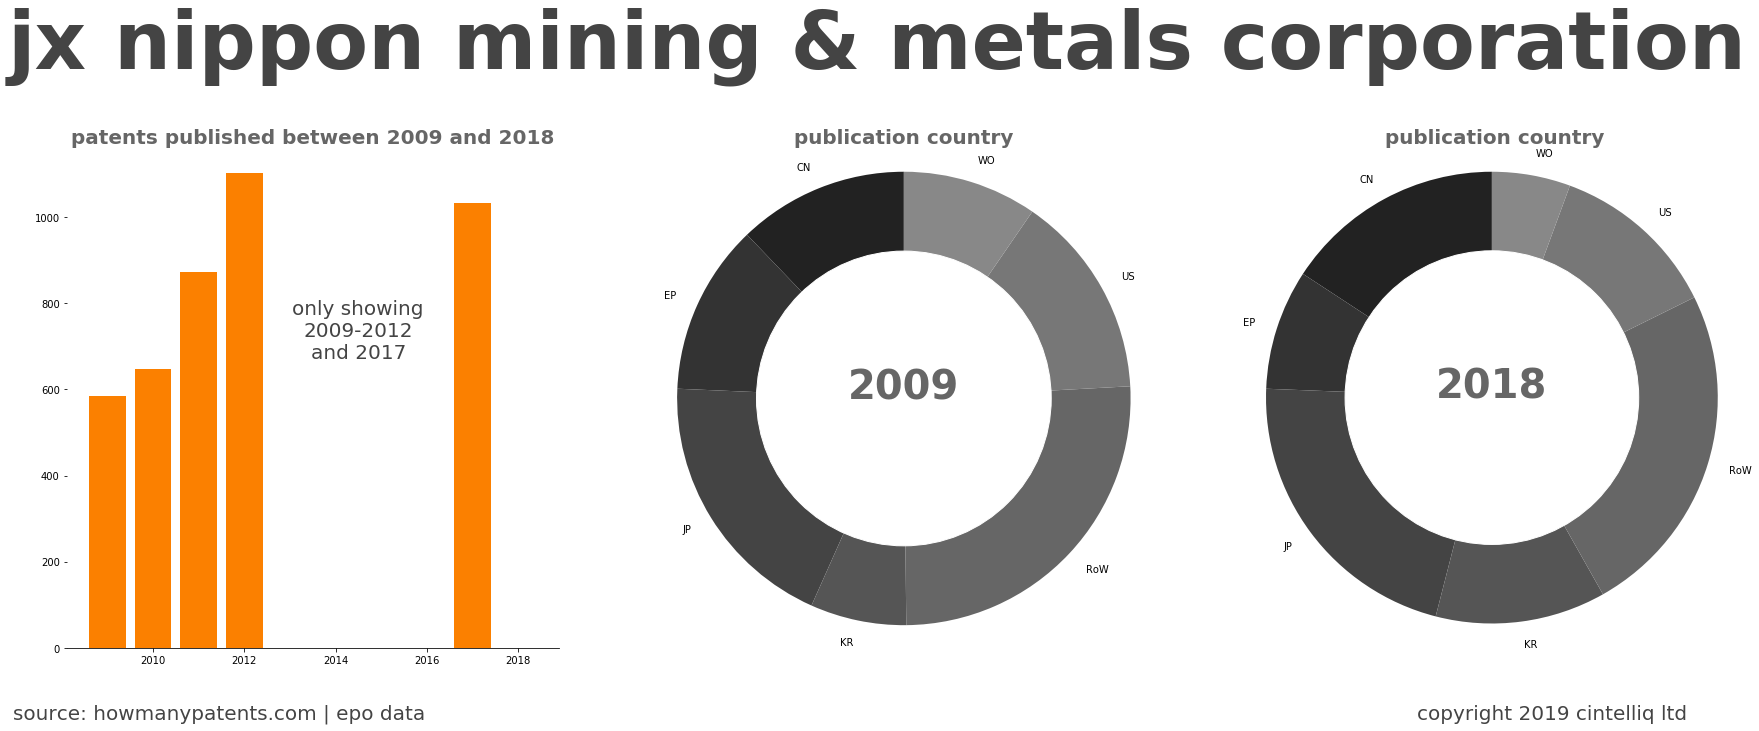 summary of patents for Jx Nippon Mining & Metals Corporation